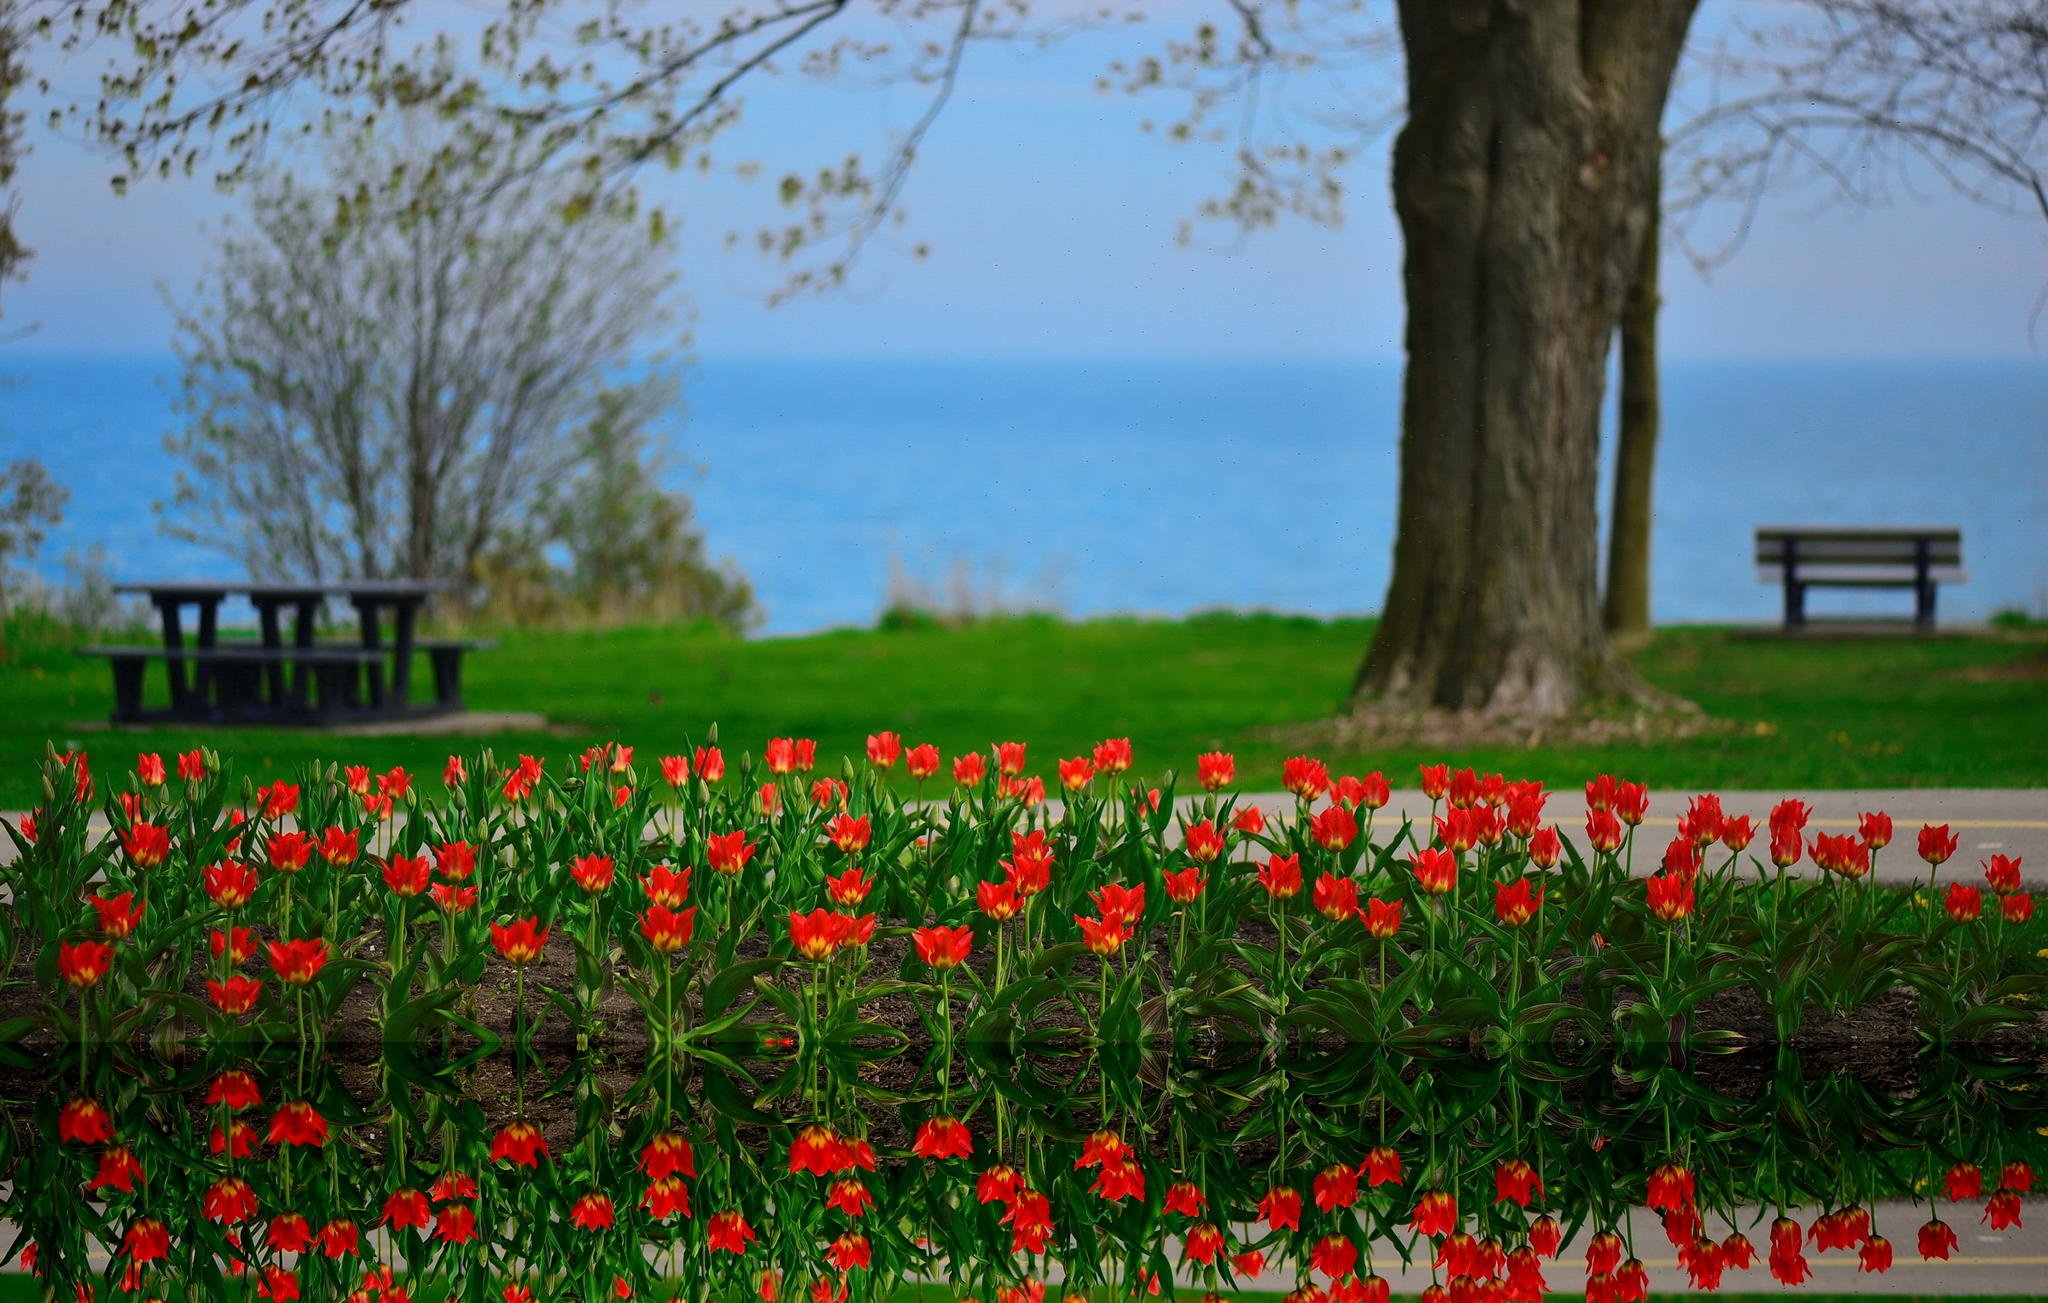 flowers, Tulips, Landscape, Reflection, Lake, Ontario, Canada, Spring